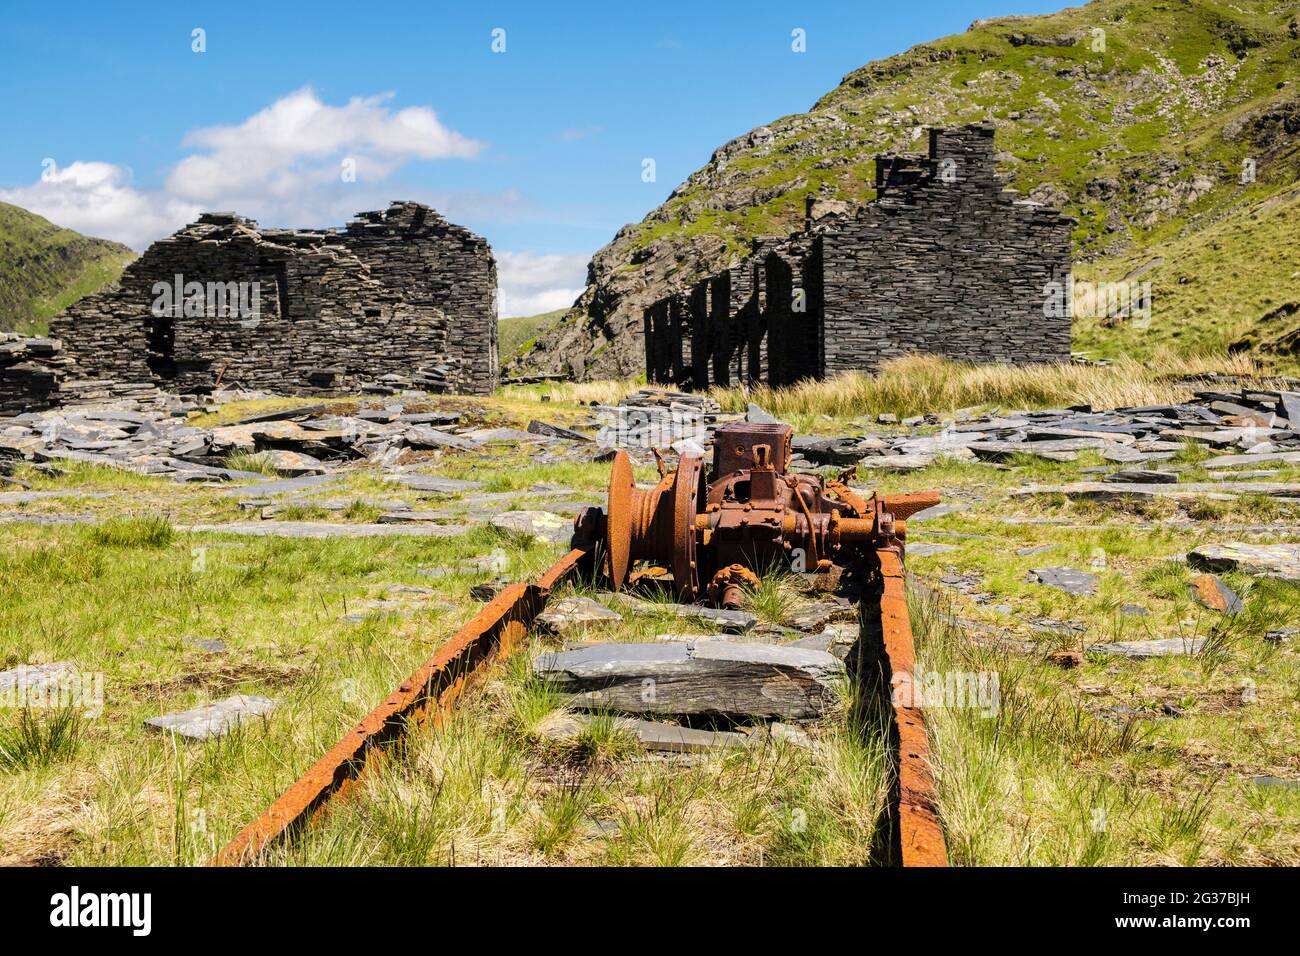 Old rusty winding engine by derelict ruins of Rhosydd slate quarry quarrymen's barracks at Bwlch y Rhosydd in the Moelwyn mountains of Snowdonia Wales Stock Photo